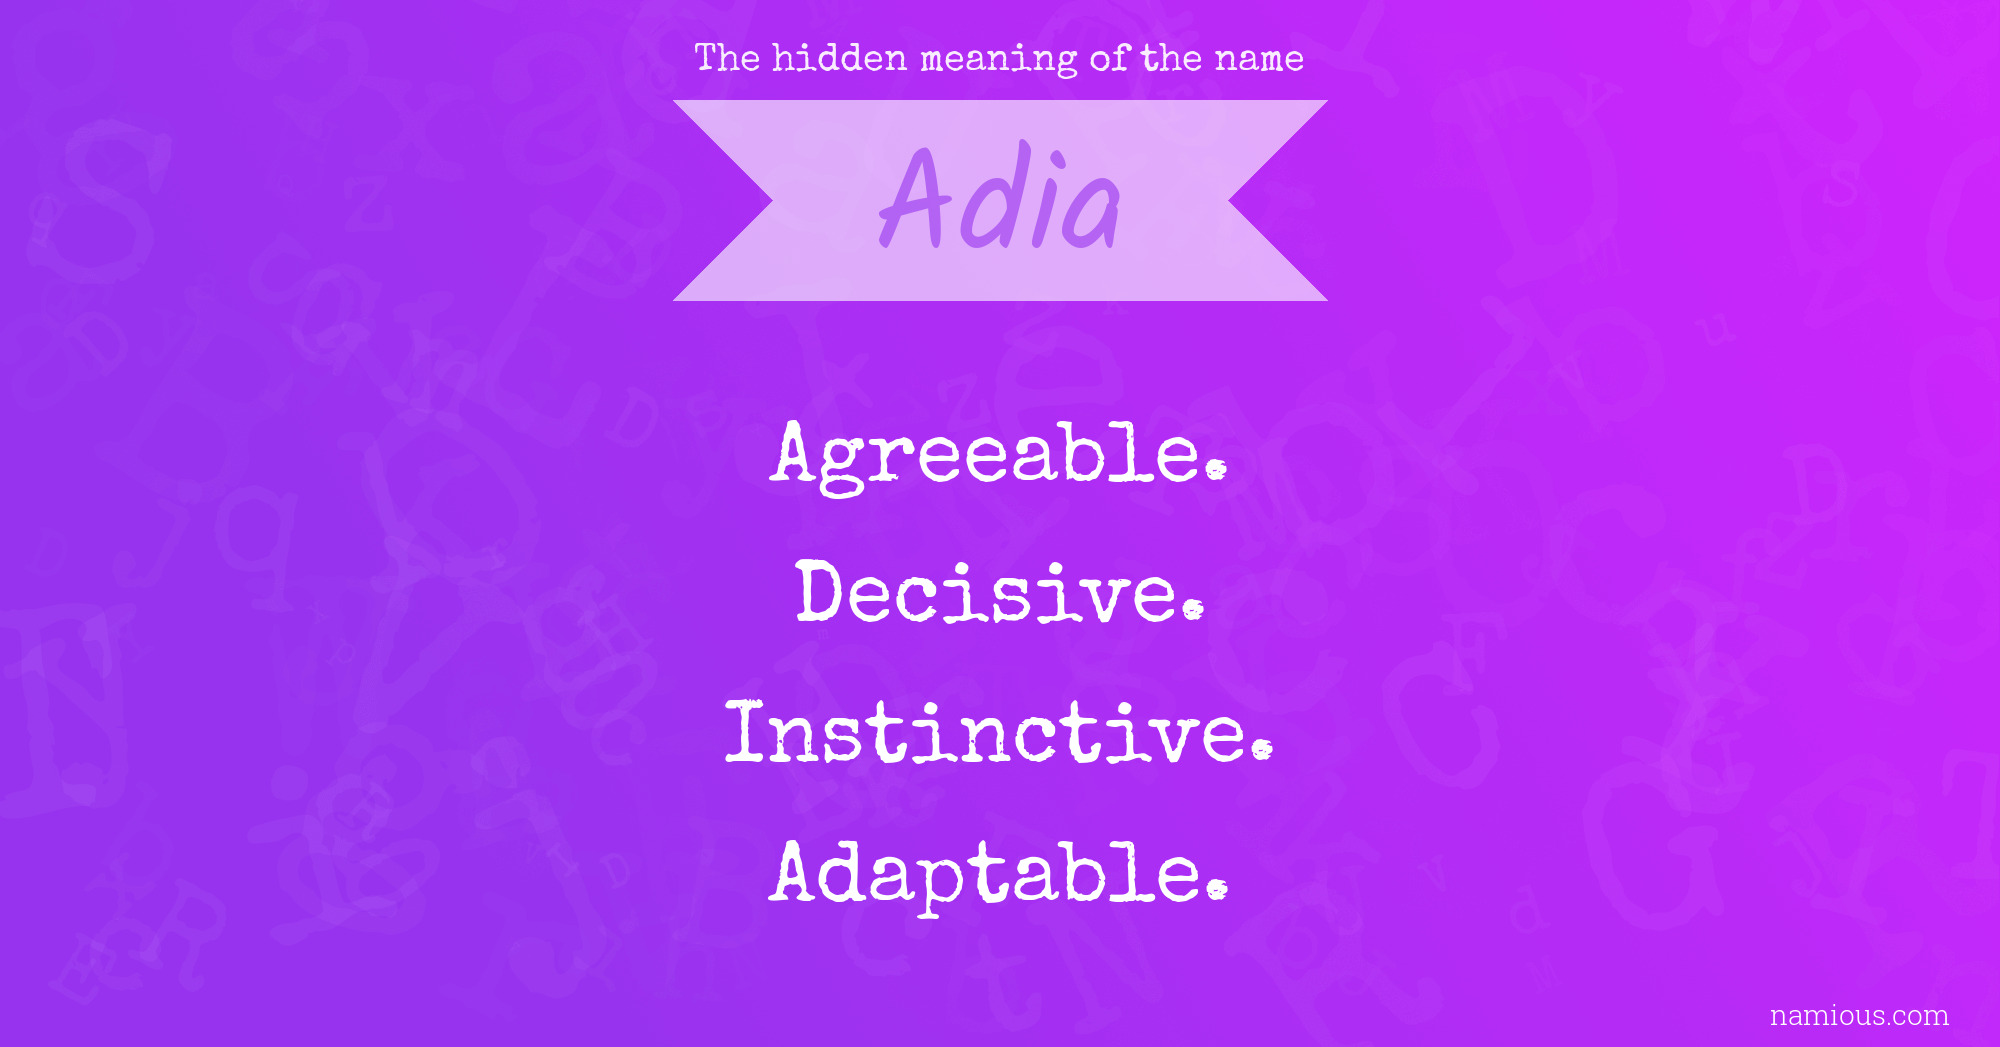 evne ø Beliggenhed The hidden meaning of the name Adia | Namious